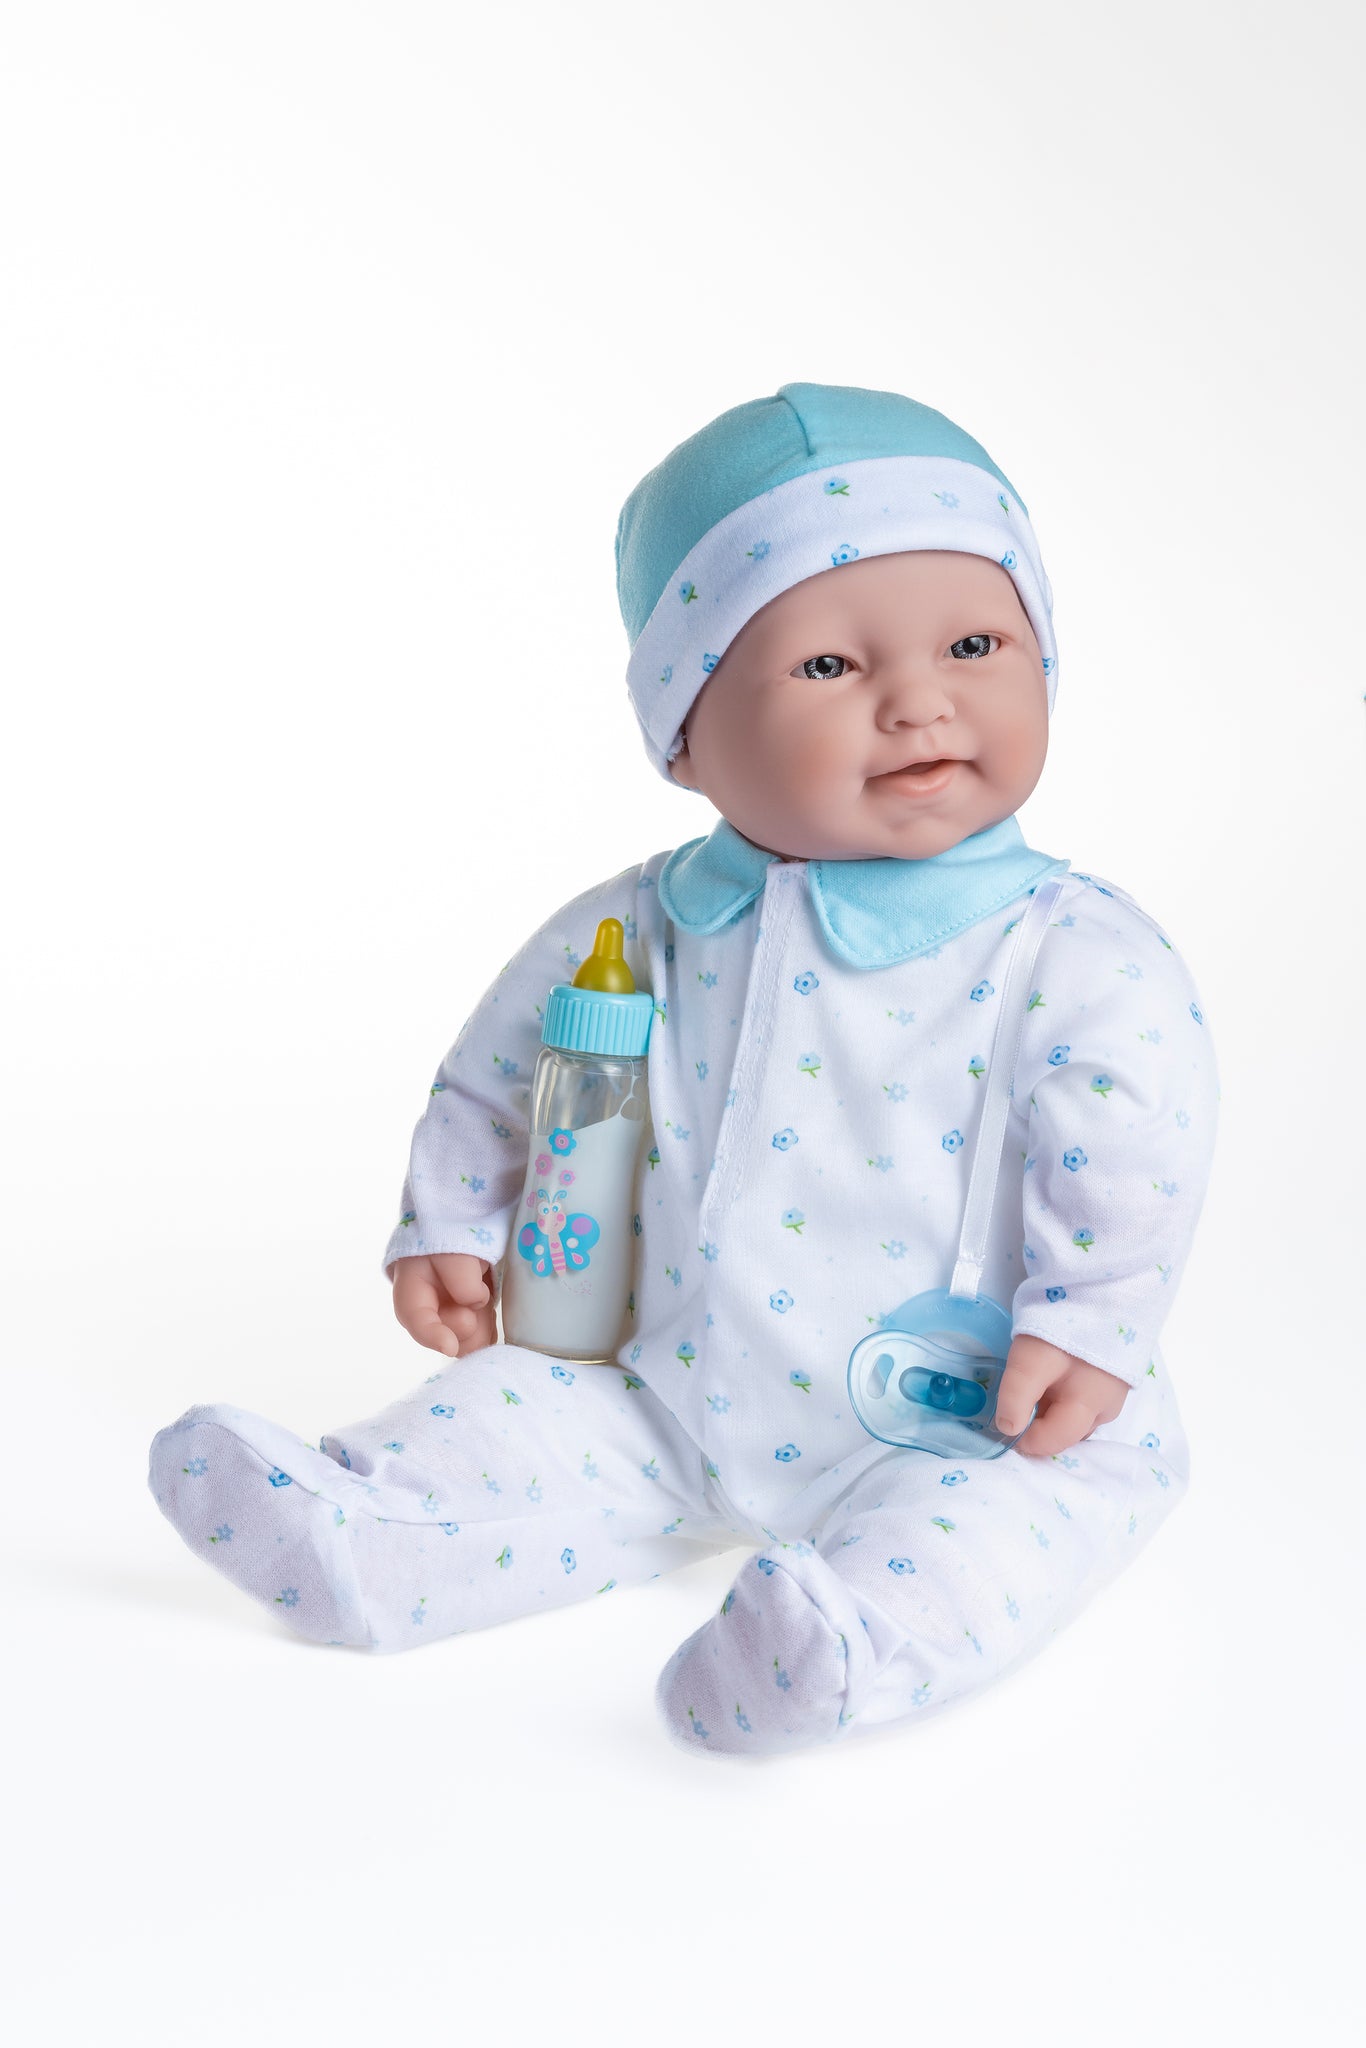 La Baby Play Doll - 20" Soft Body Baby Doll in baby outfit Blue w/ Pacifier